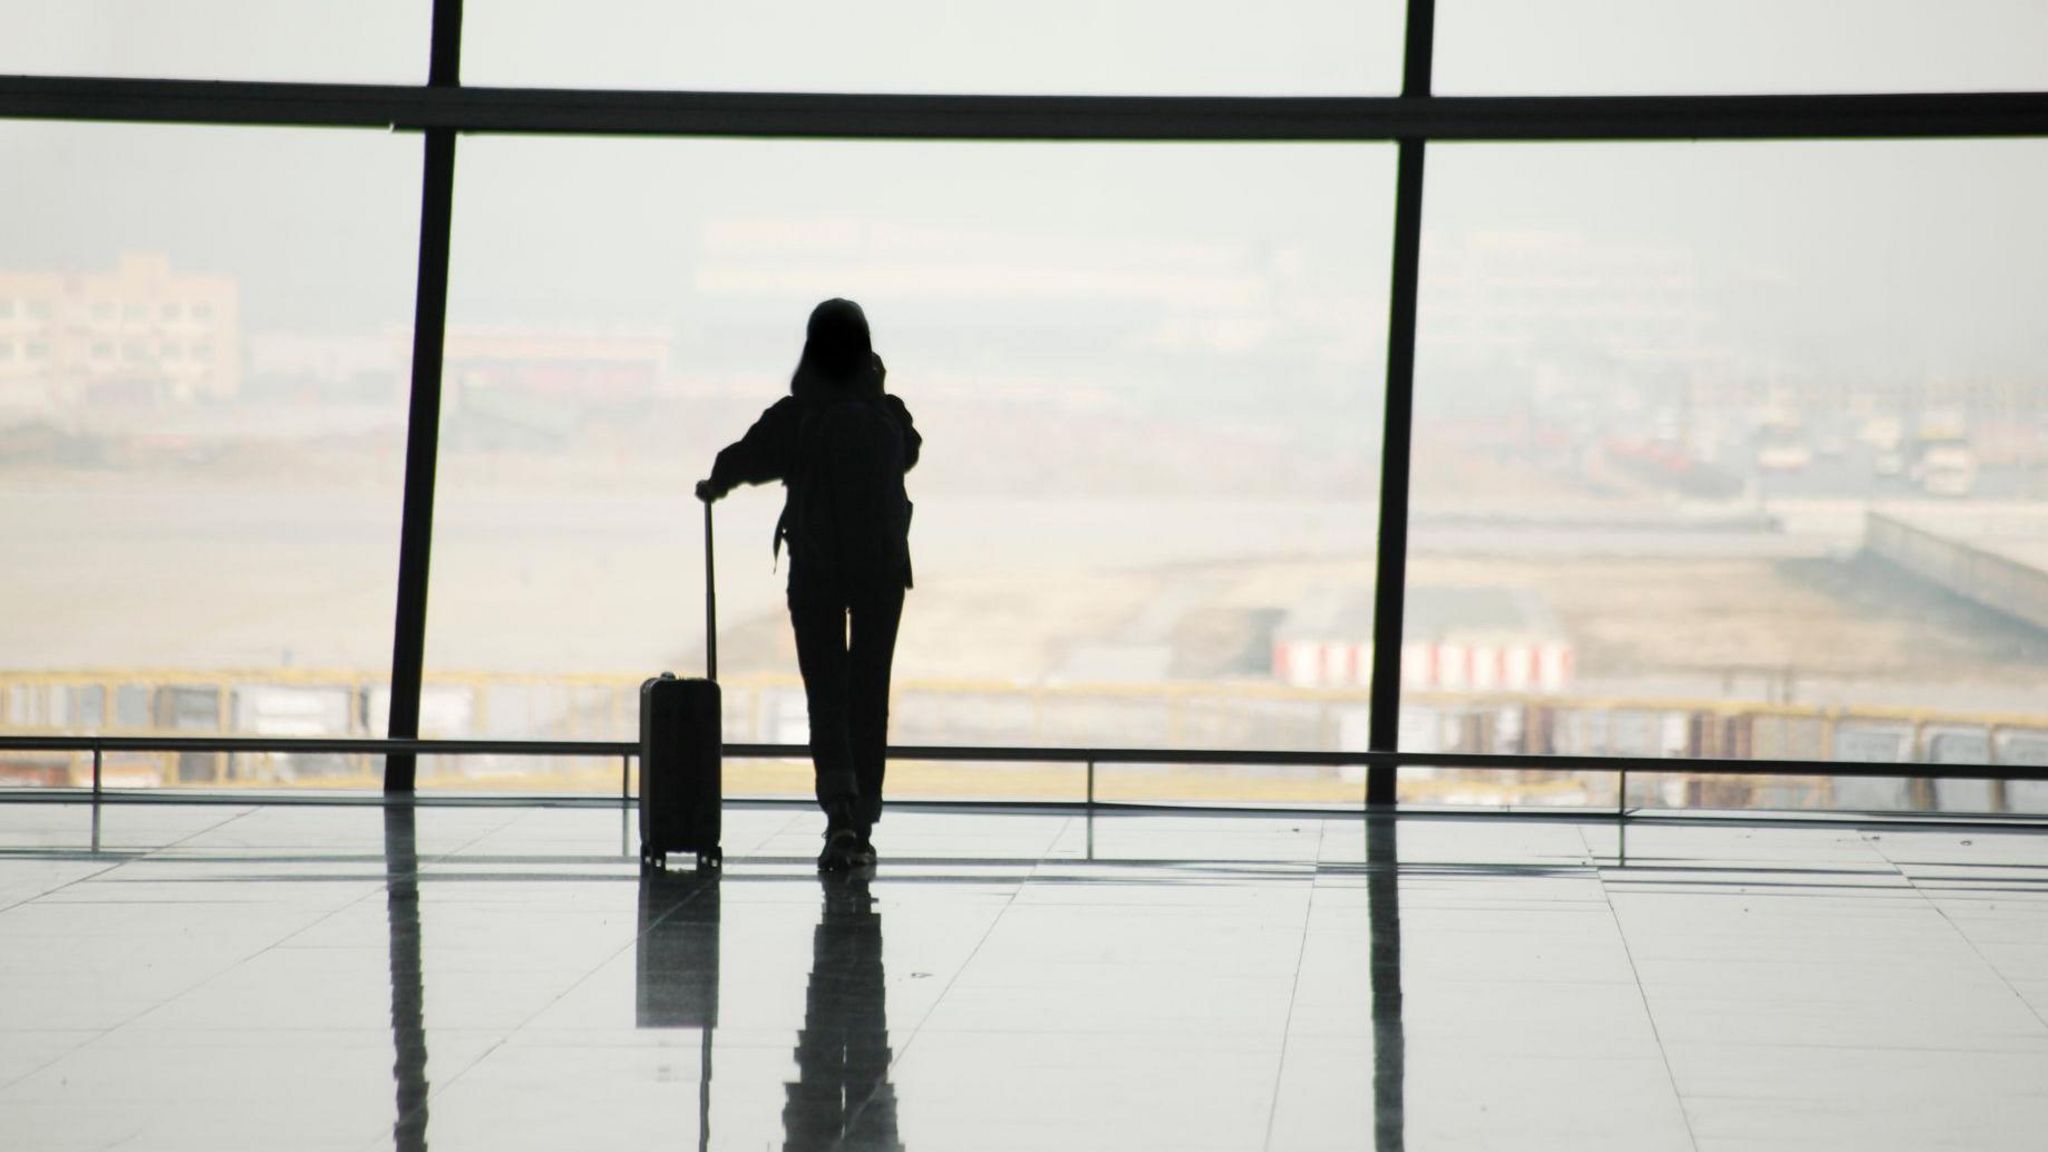 A silhouette of a woman in an airport